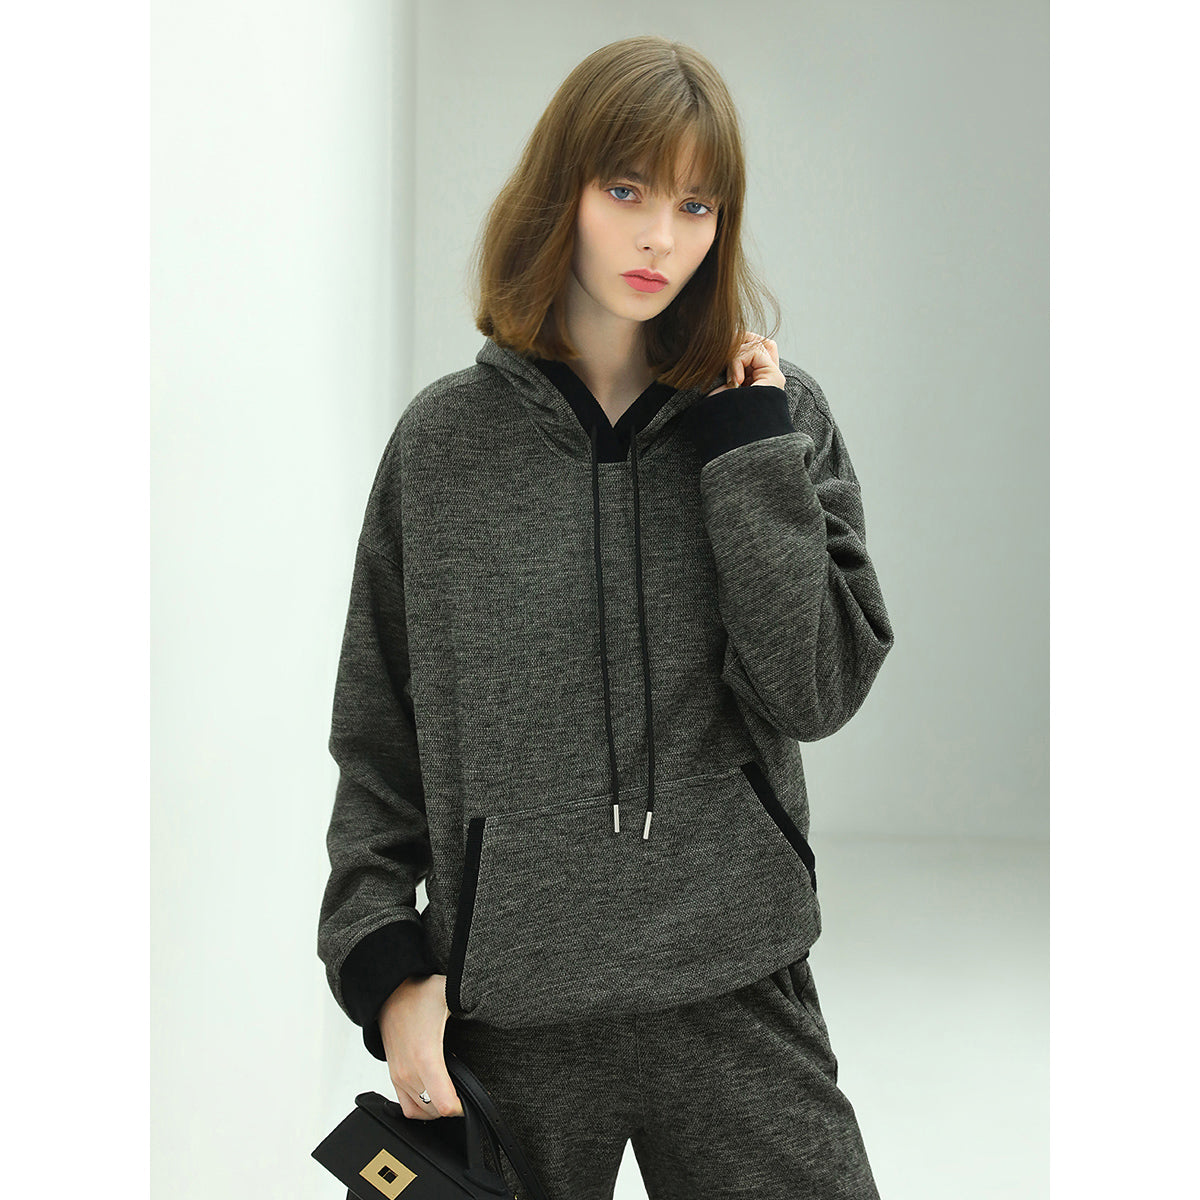 comfy-knitted-charcoal-hooded-sweater_all_charcoal_1.jpg